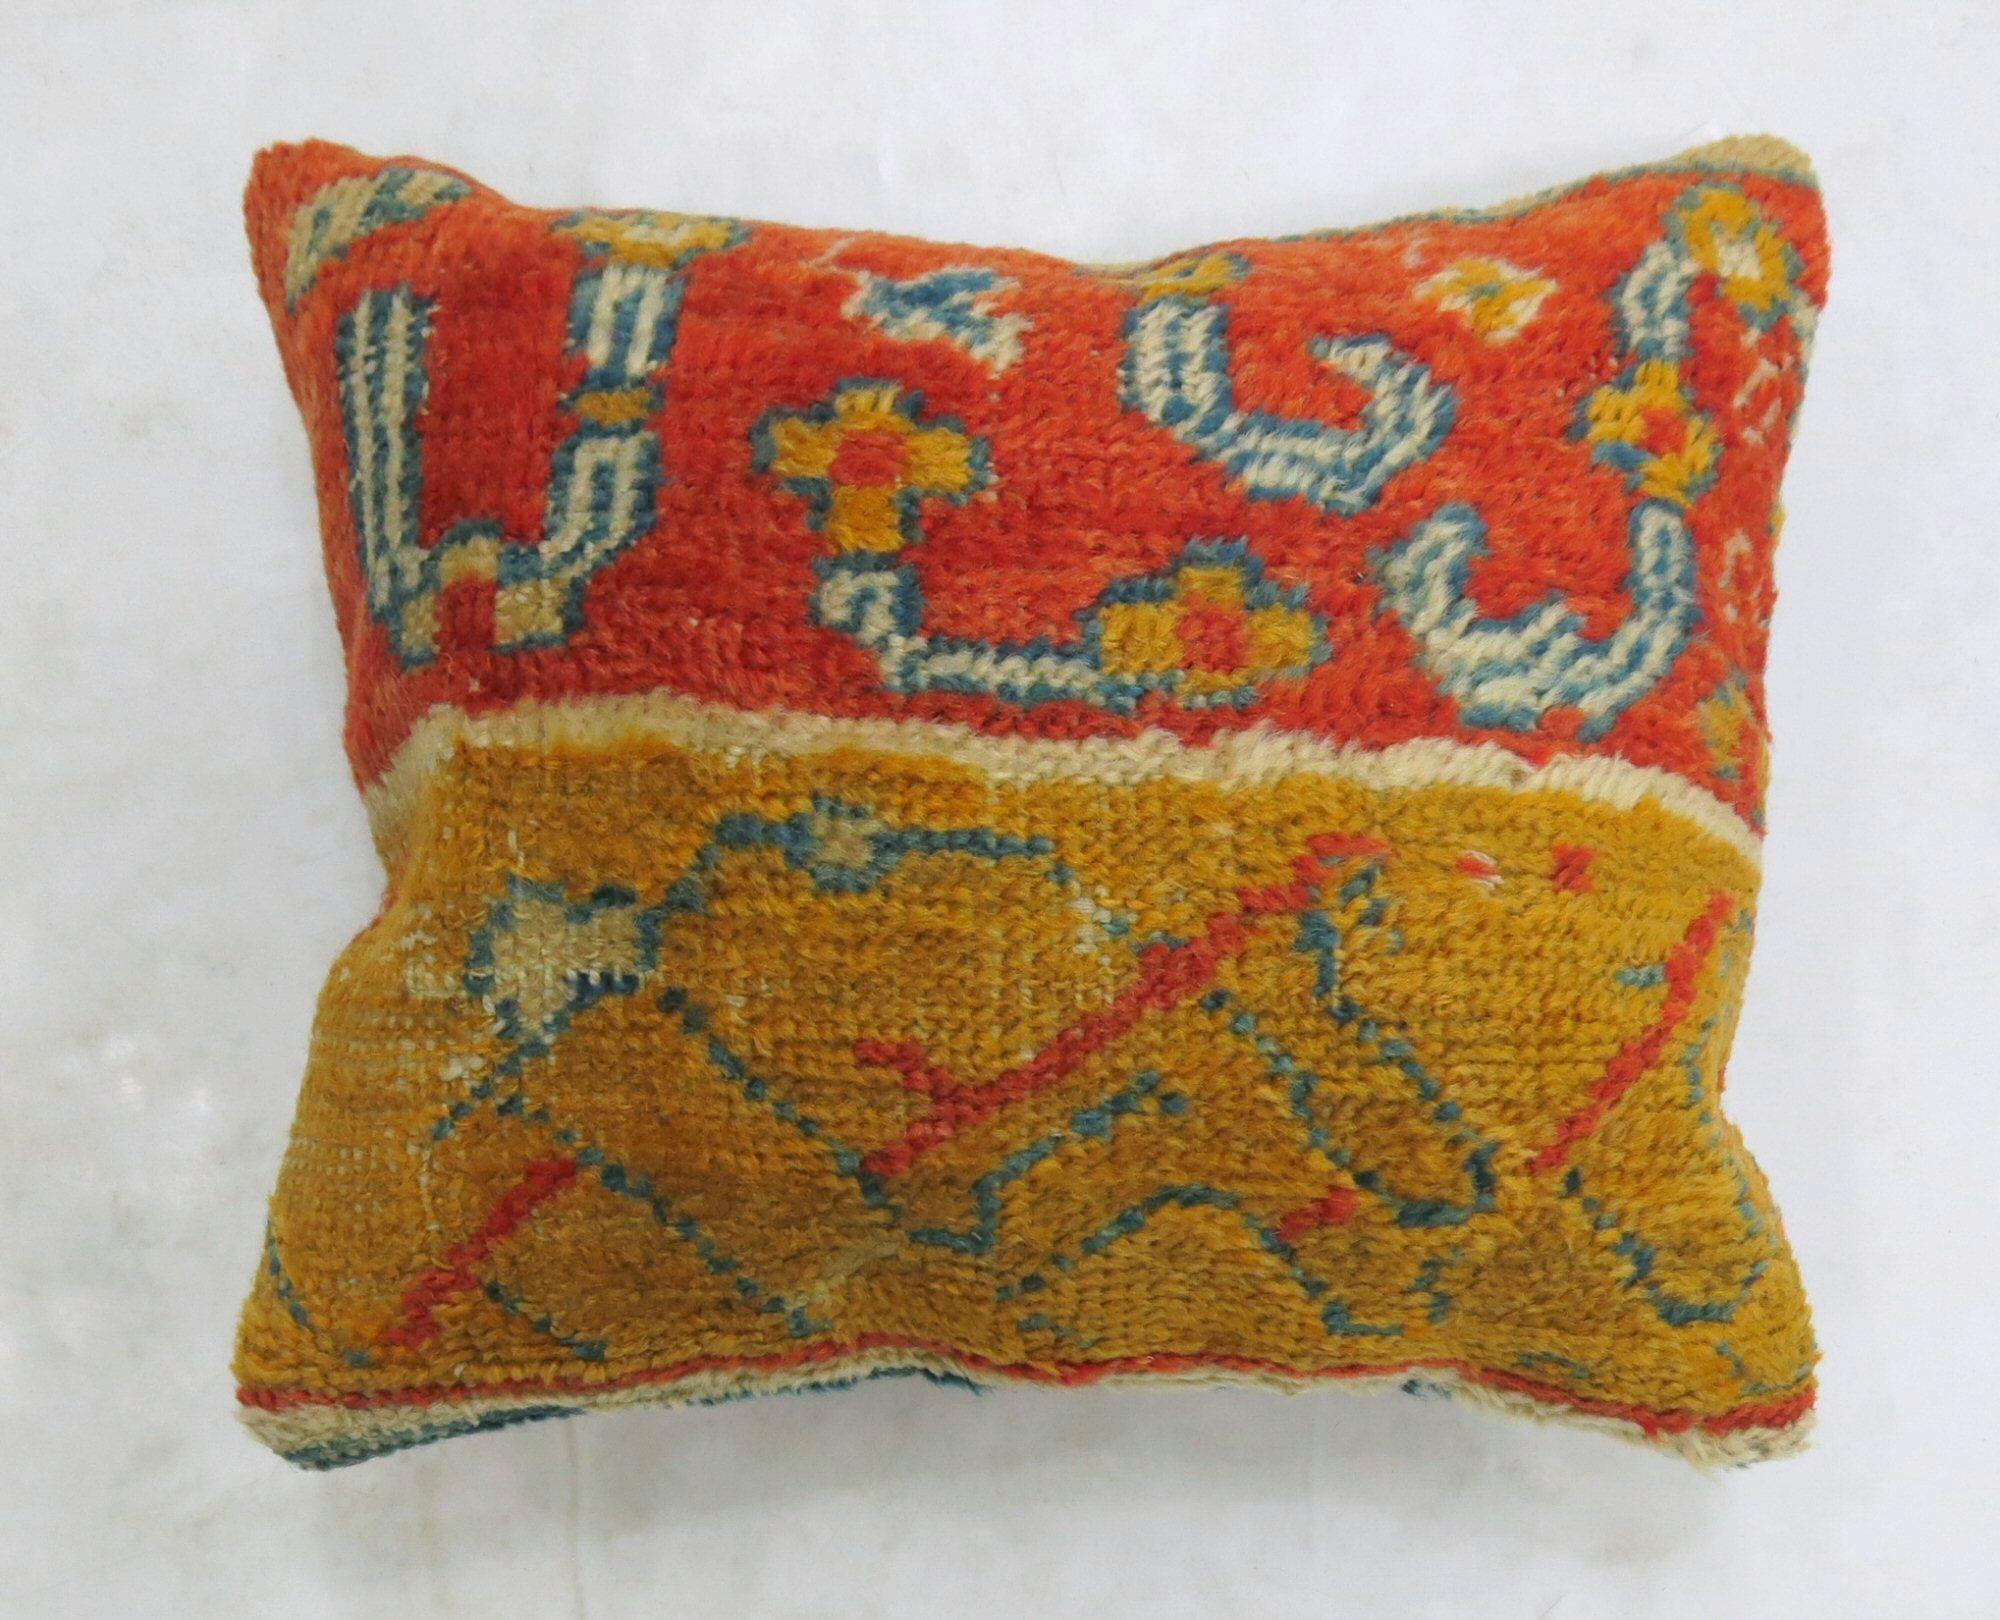 Pillow made from an early 20th century coral and gold color antique Oushak rug

Measures: 16